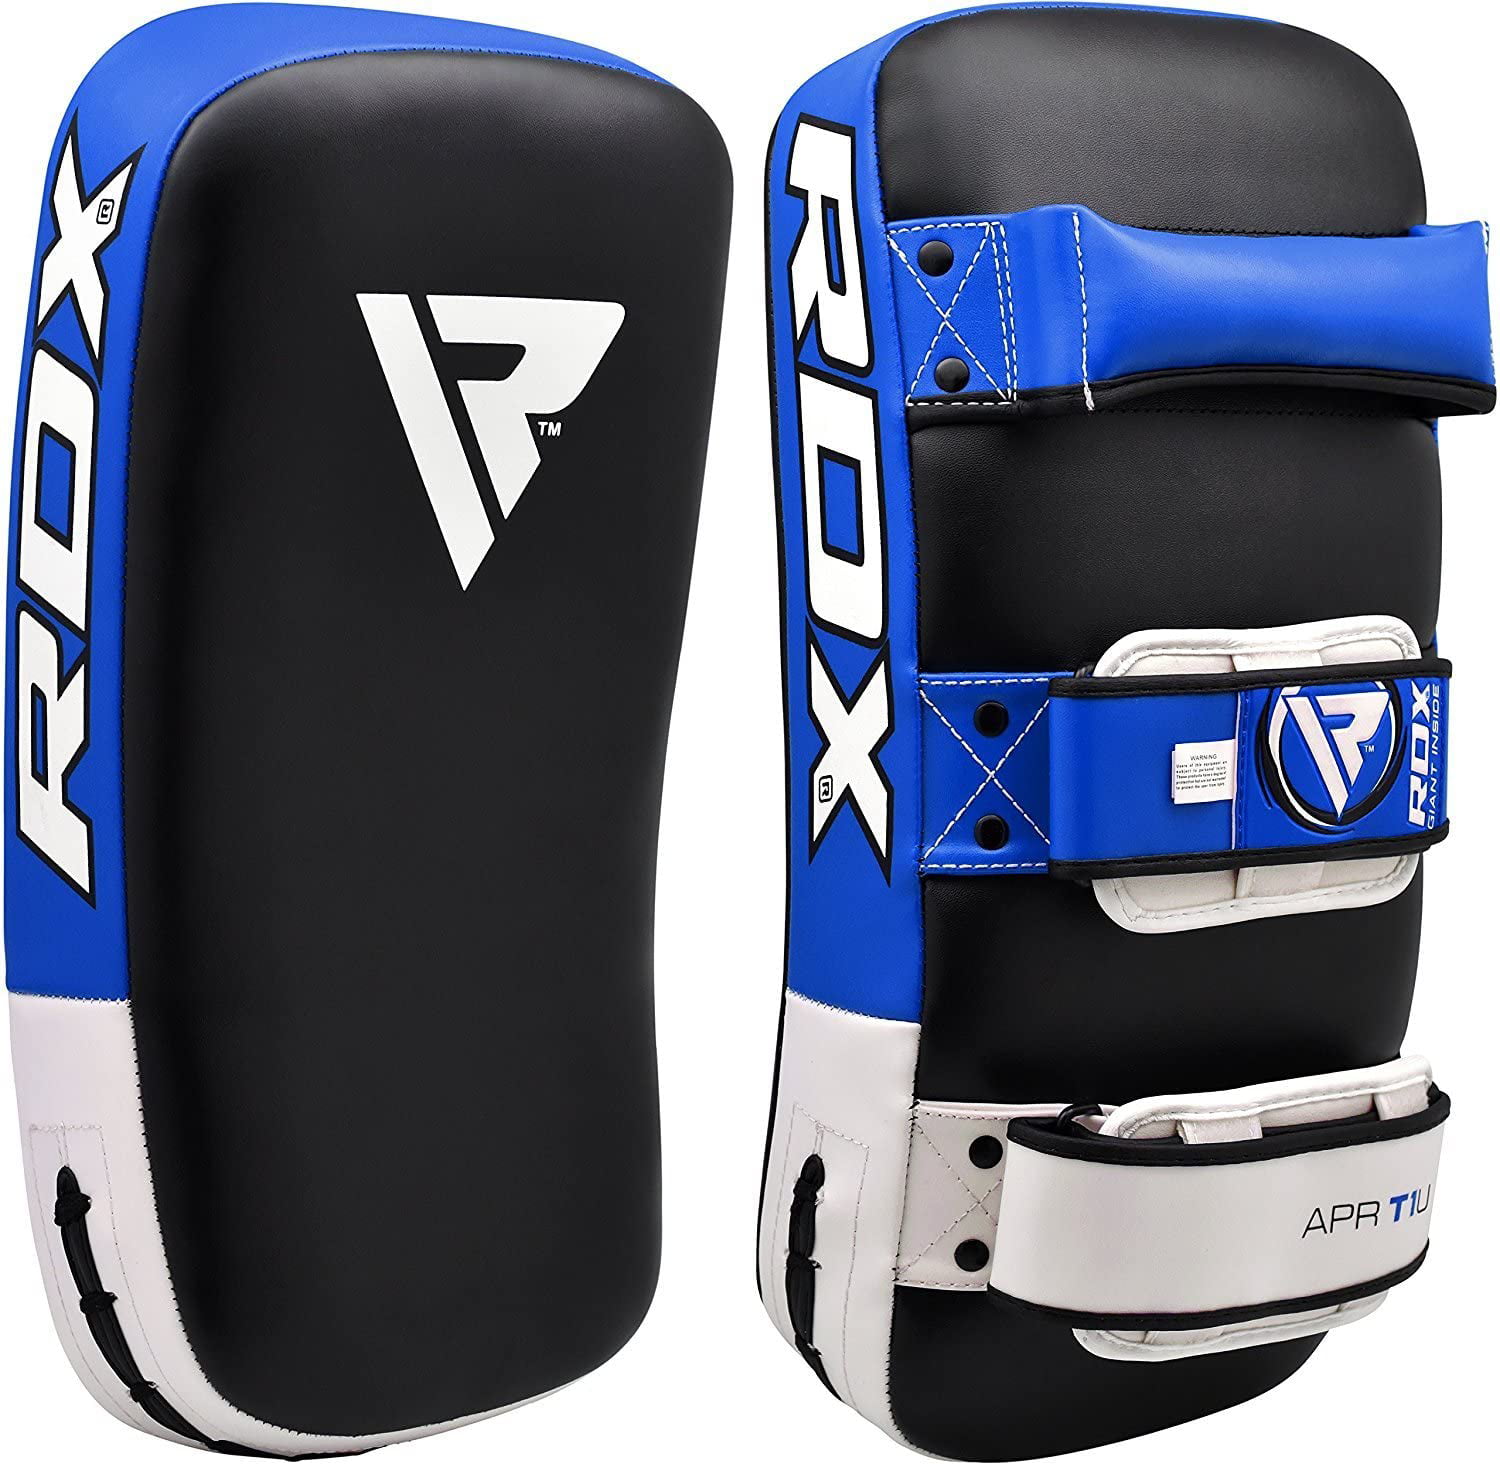 Boxing Strike Shield Muay Thai Pads for Kicking for MMA Training Sold as 1 piece 